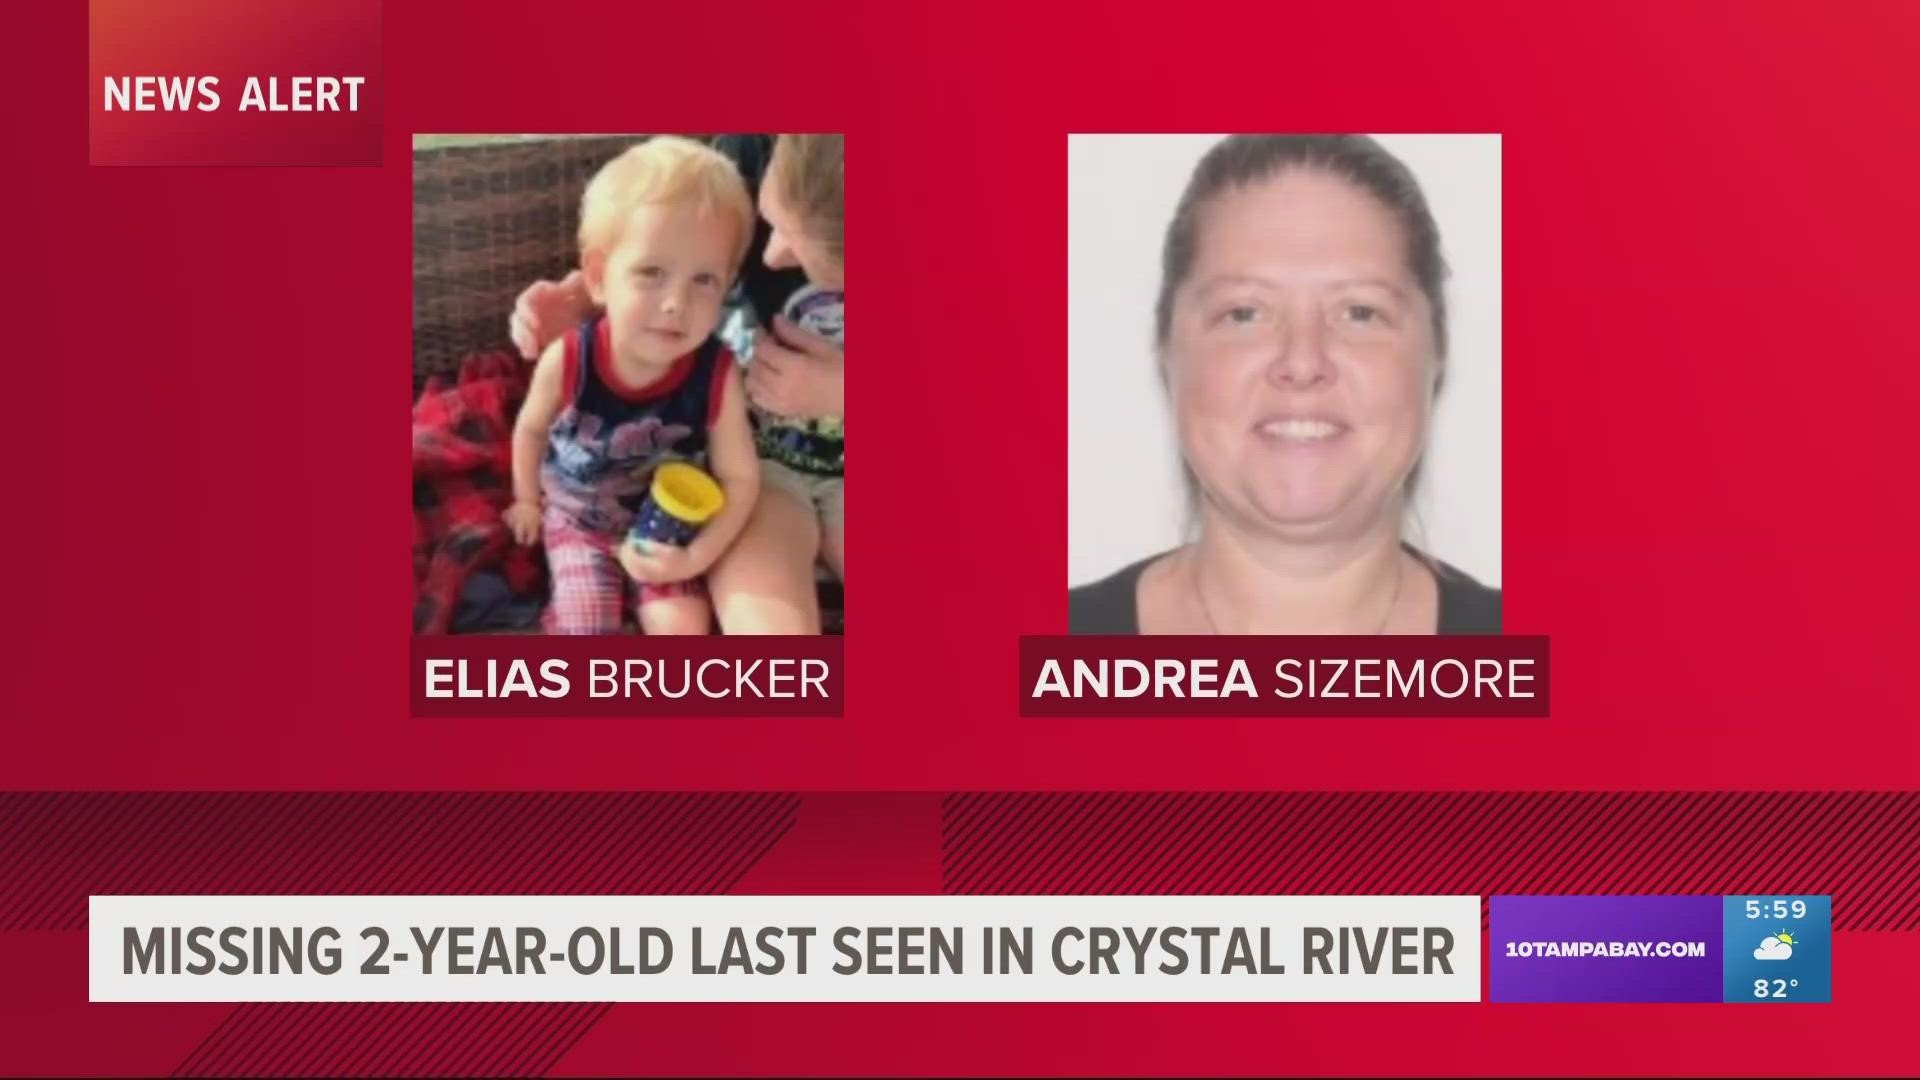 Authorities say Elias Brucker may be in the company of 41-year-old Andrea Sizemore.